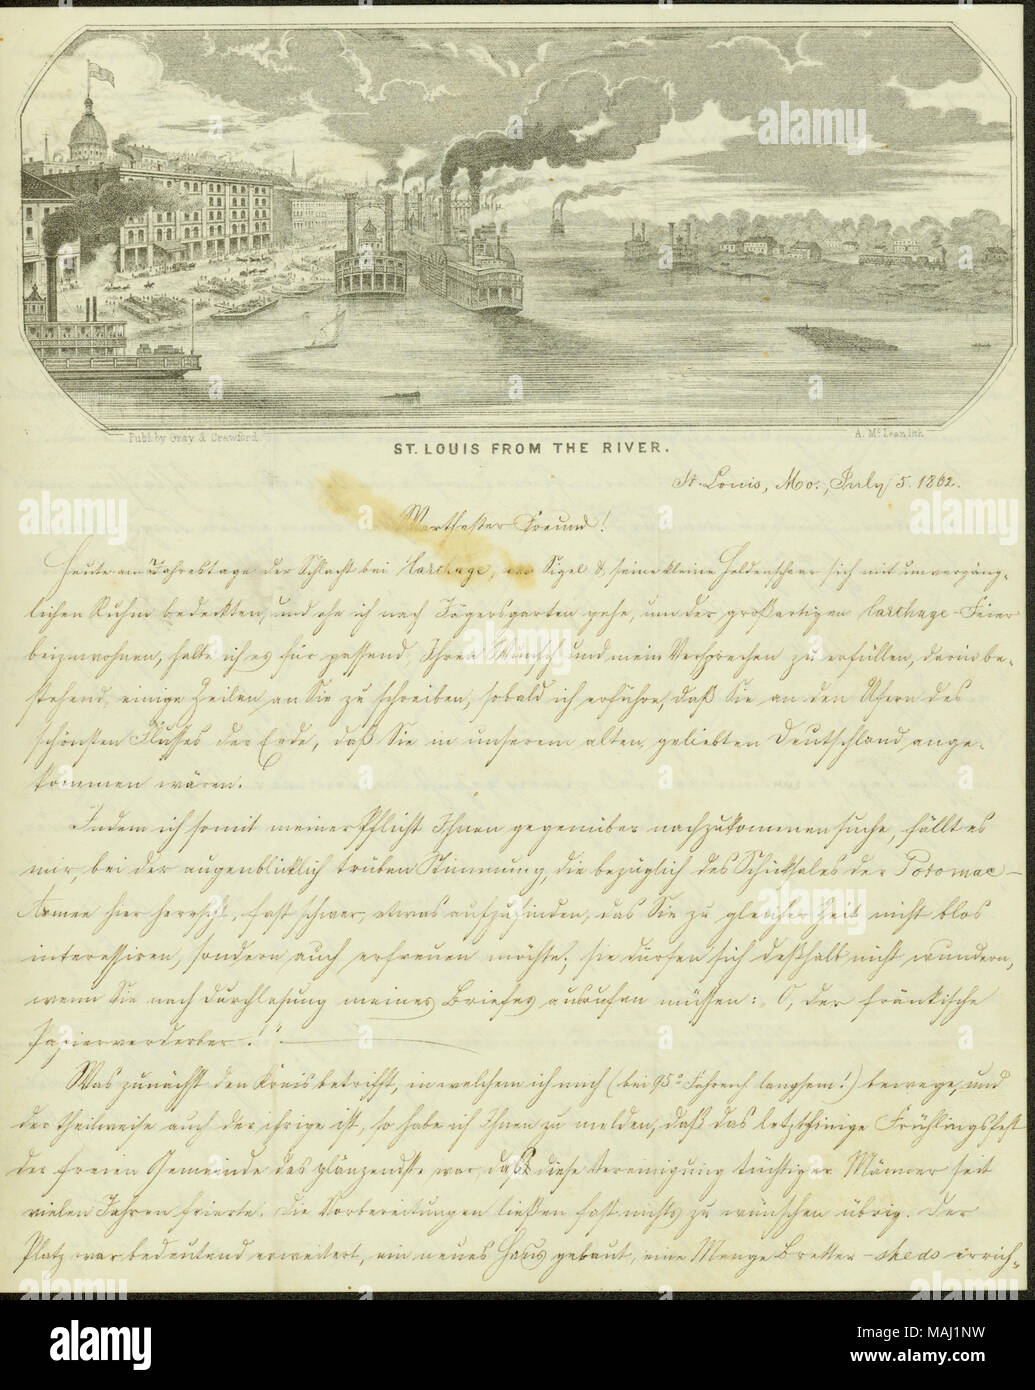 Comments on the progress of the war. Includes typescript in German with English translation. Letterhead illustration of the St. Louis riverfront. Title: Letter from Heinrich Clarner, St. Louis, Mo., to a friend, July 5, 1862  . 5 July 1862. Clarner, Heinrich Stock Photo